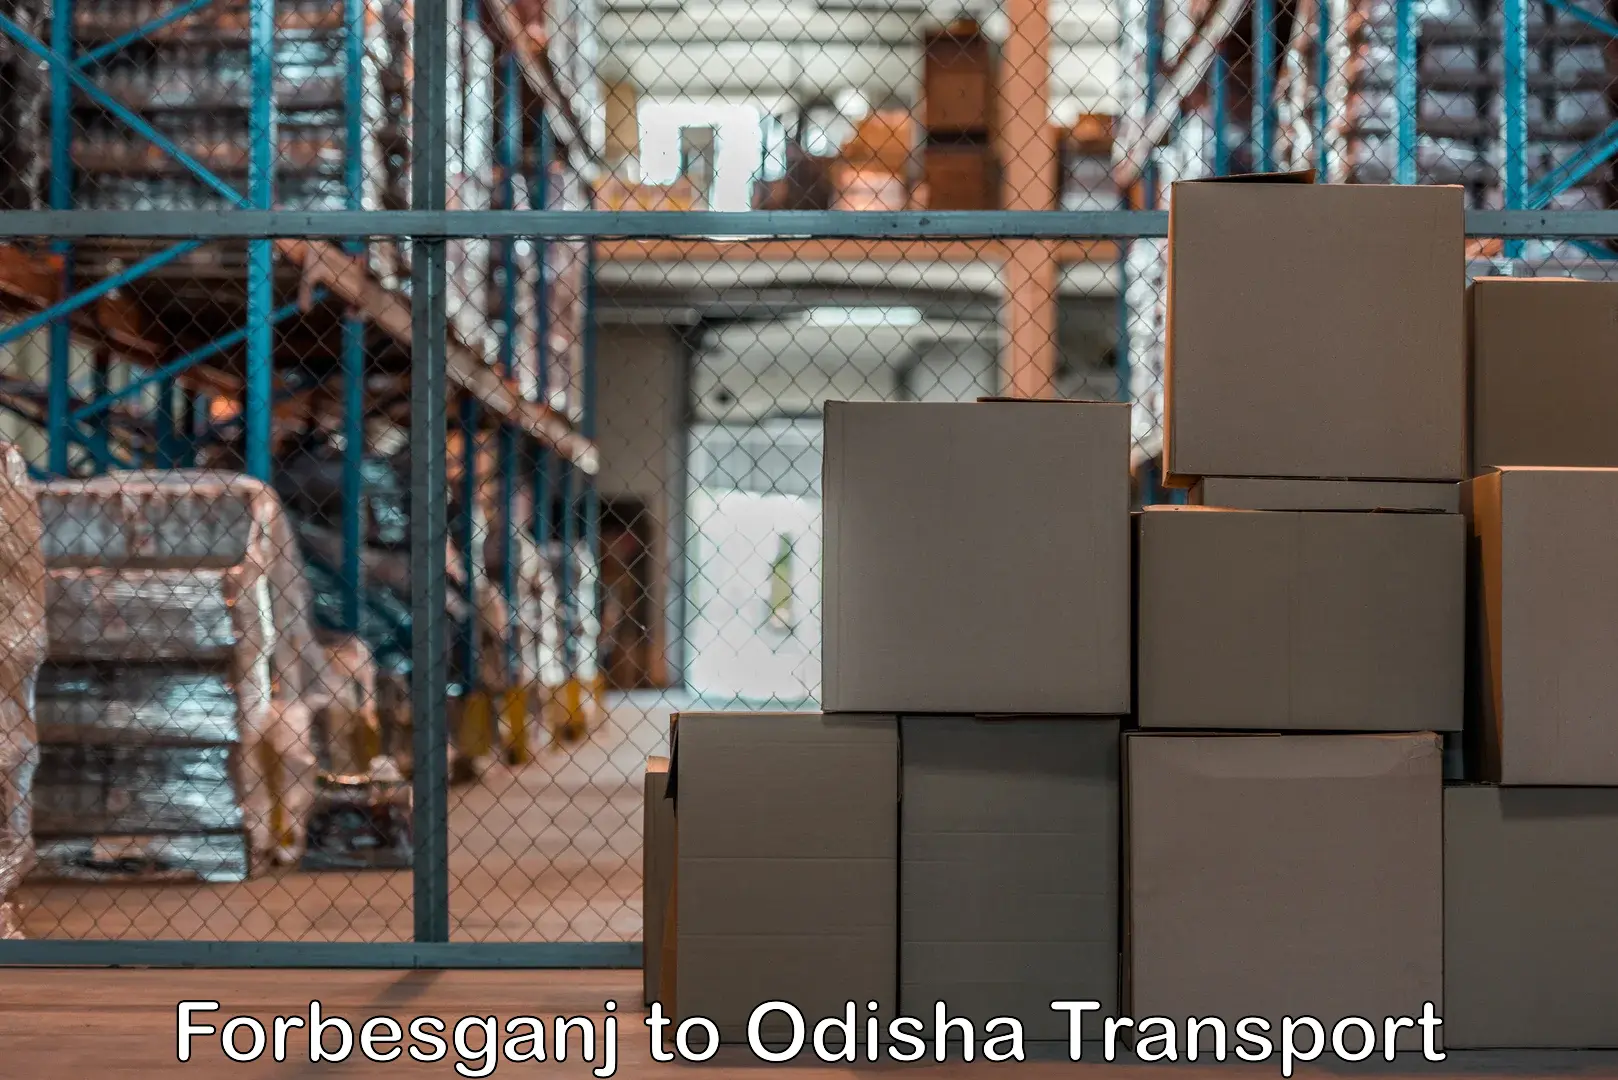 Road transport online services Forbesganj to Dhamanagar